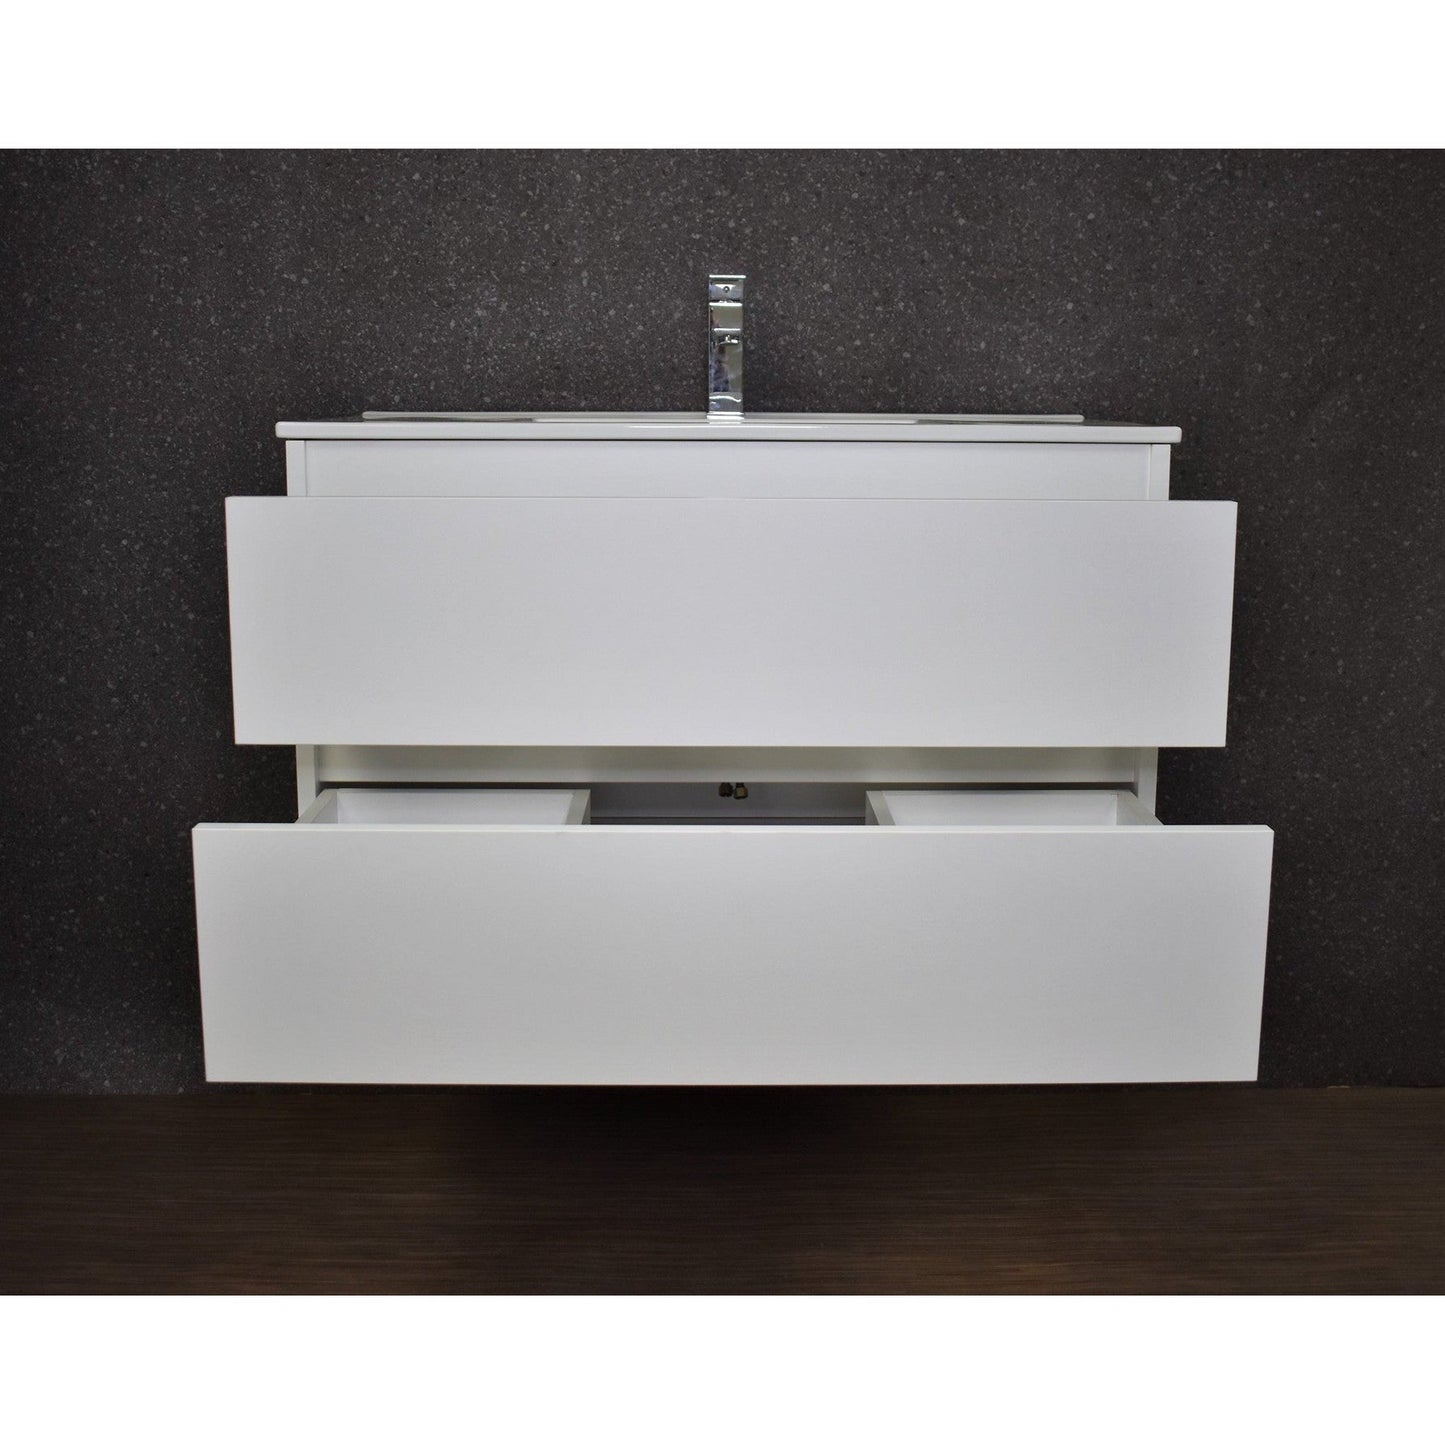 Volpa USA Salt 36" x 18" Glossy White Wall-Mounted Floating Bathroom Vanity With Drawers, Integrated Porcelain Ceramic Top and Integrated Ceramic Sink